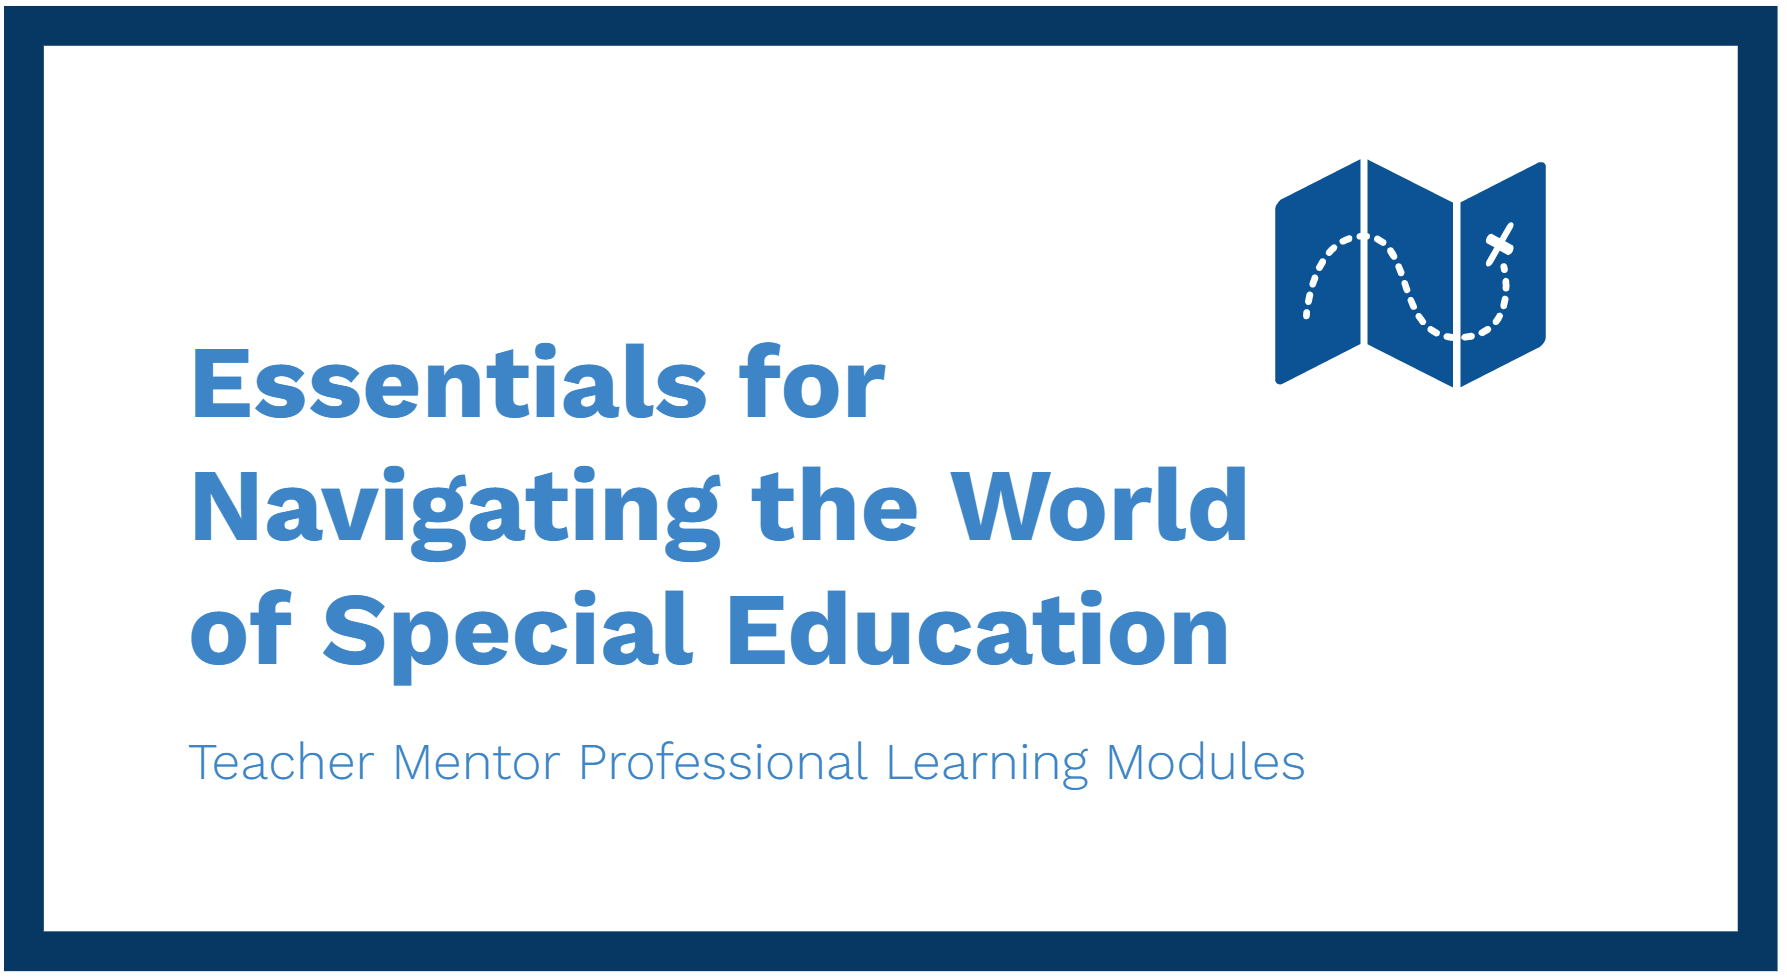 Essentials for Navigating the World of Special Education